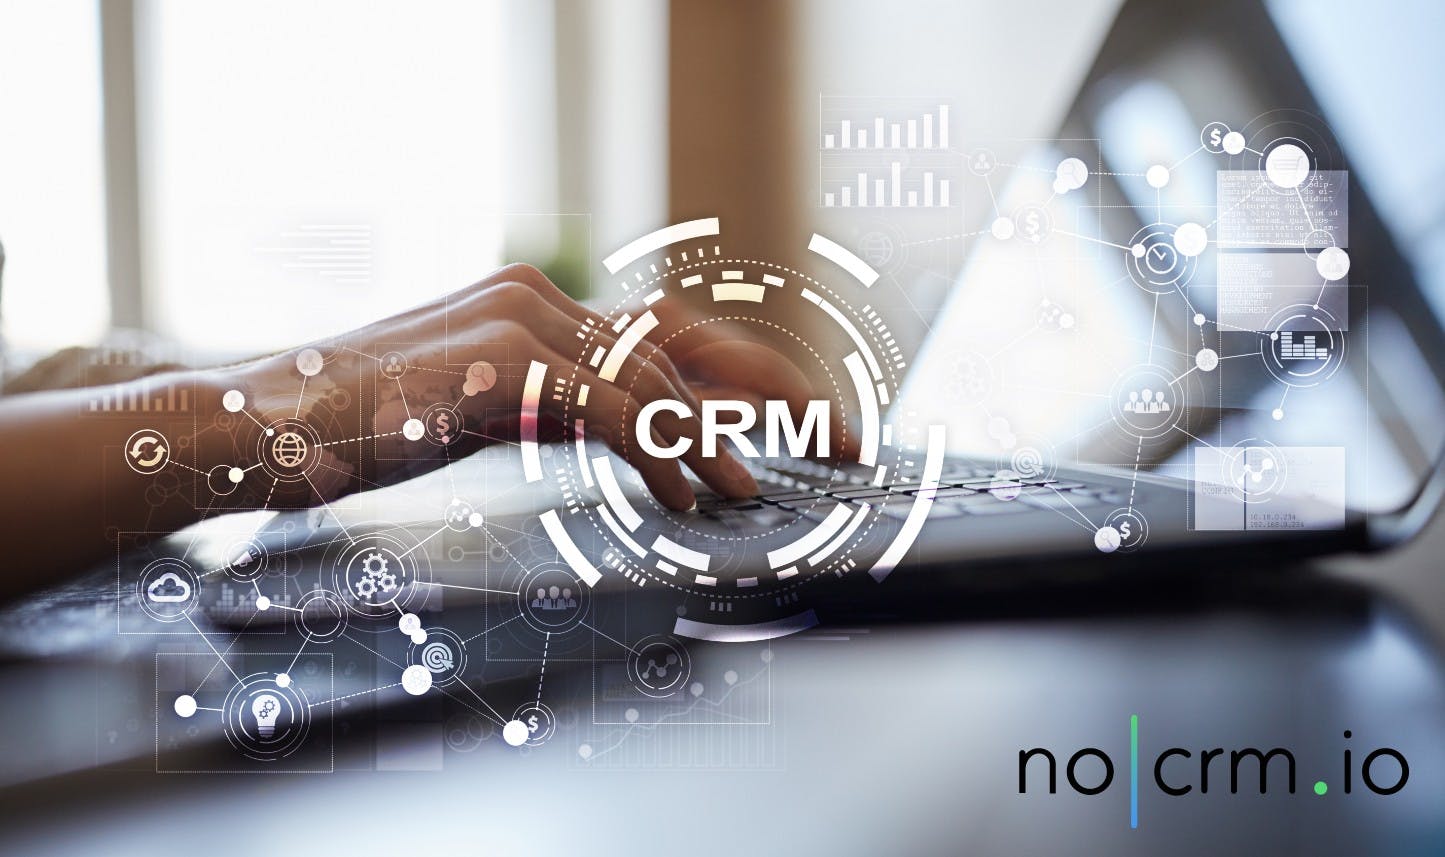 noCRM.io CRM: Review, Features, and Prices